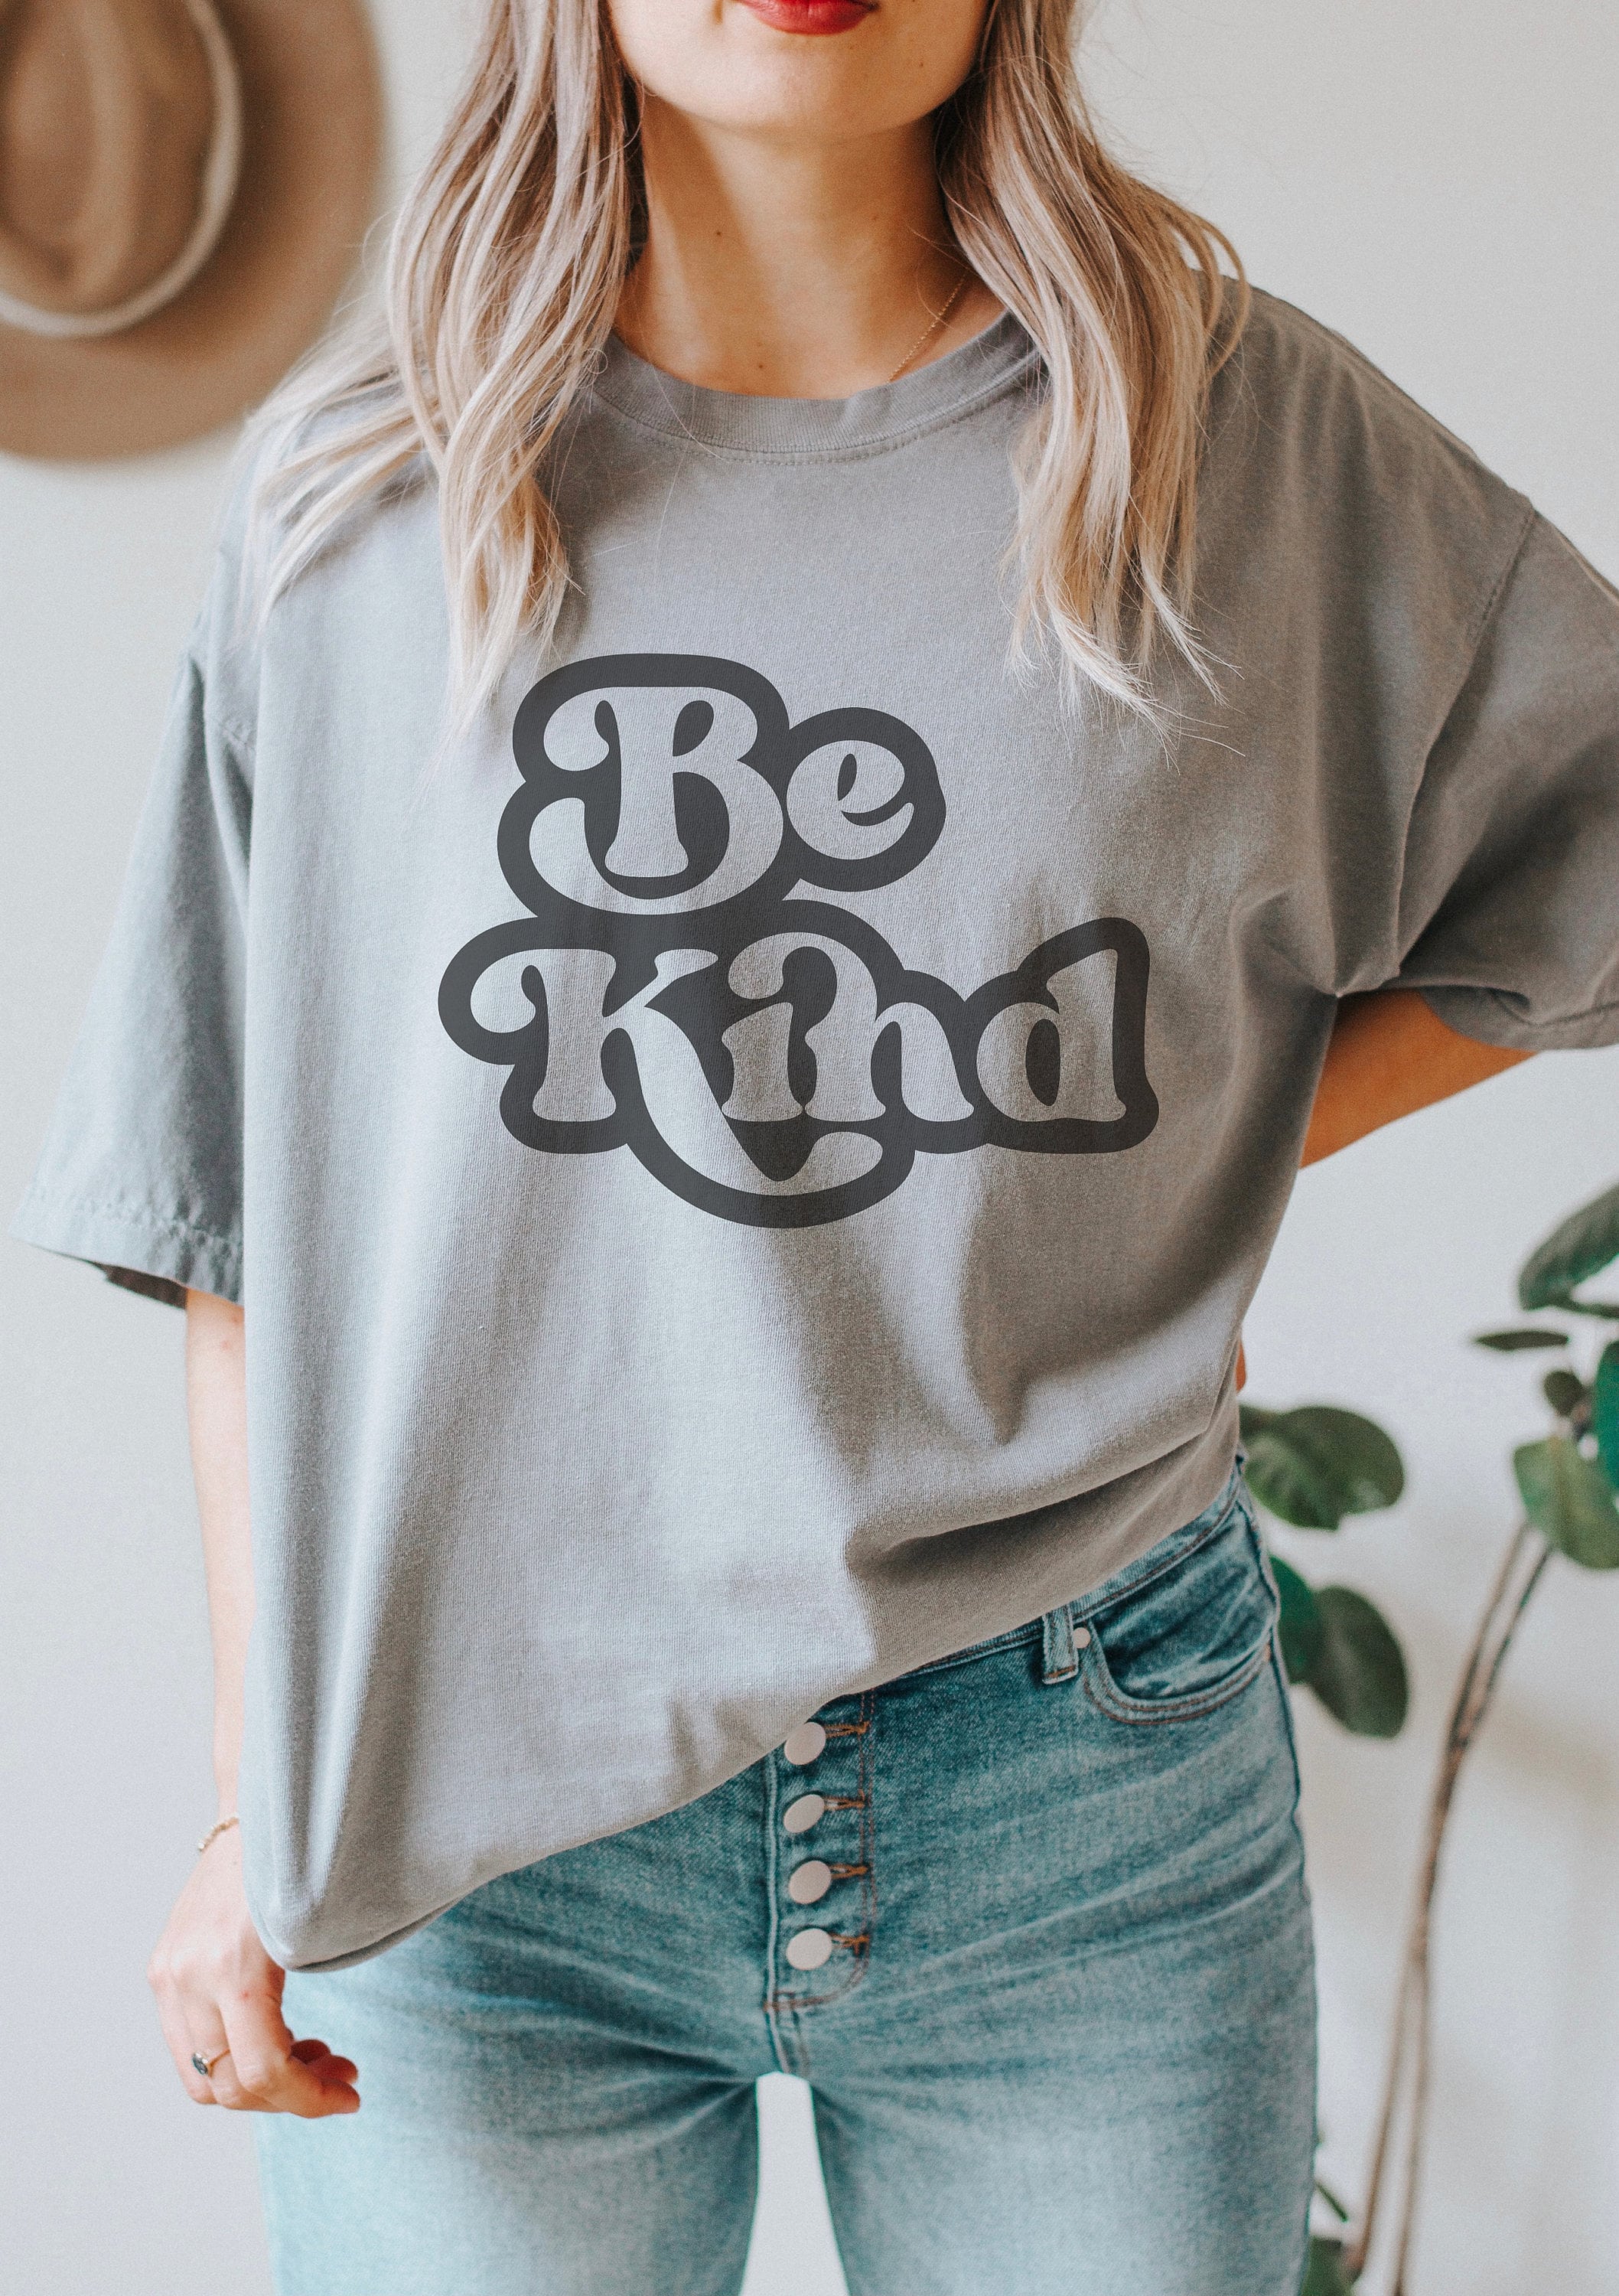 Be Kind Tshirts for Women Positive Quotes Shirt Kind | Etsy